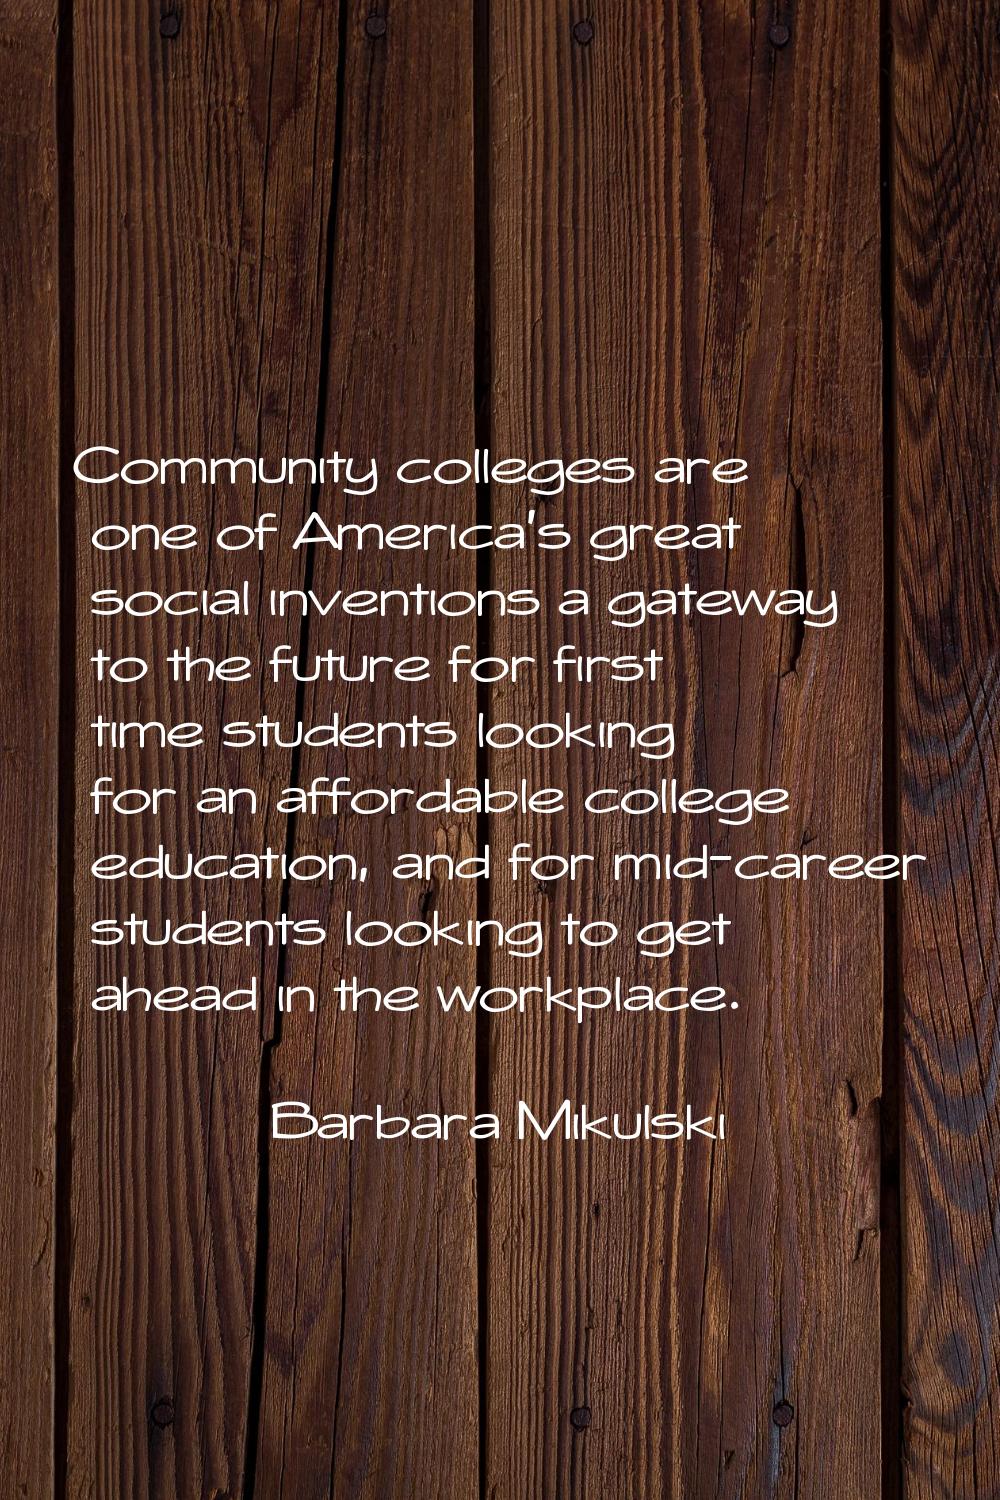 Community colleges are one of America's great social inventions a gateway to the future for first t